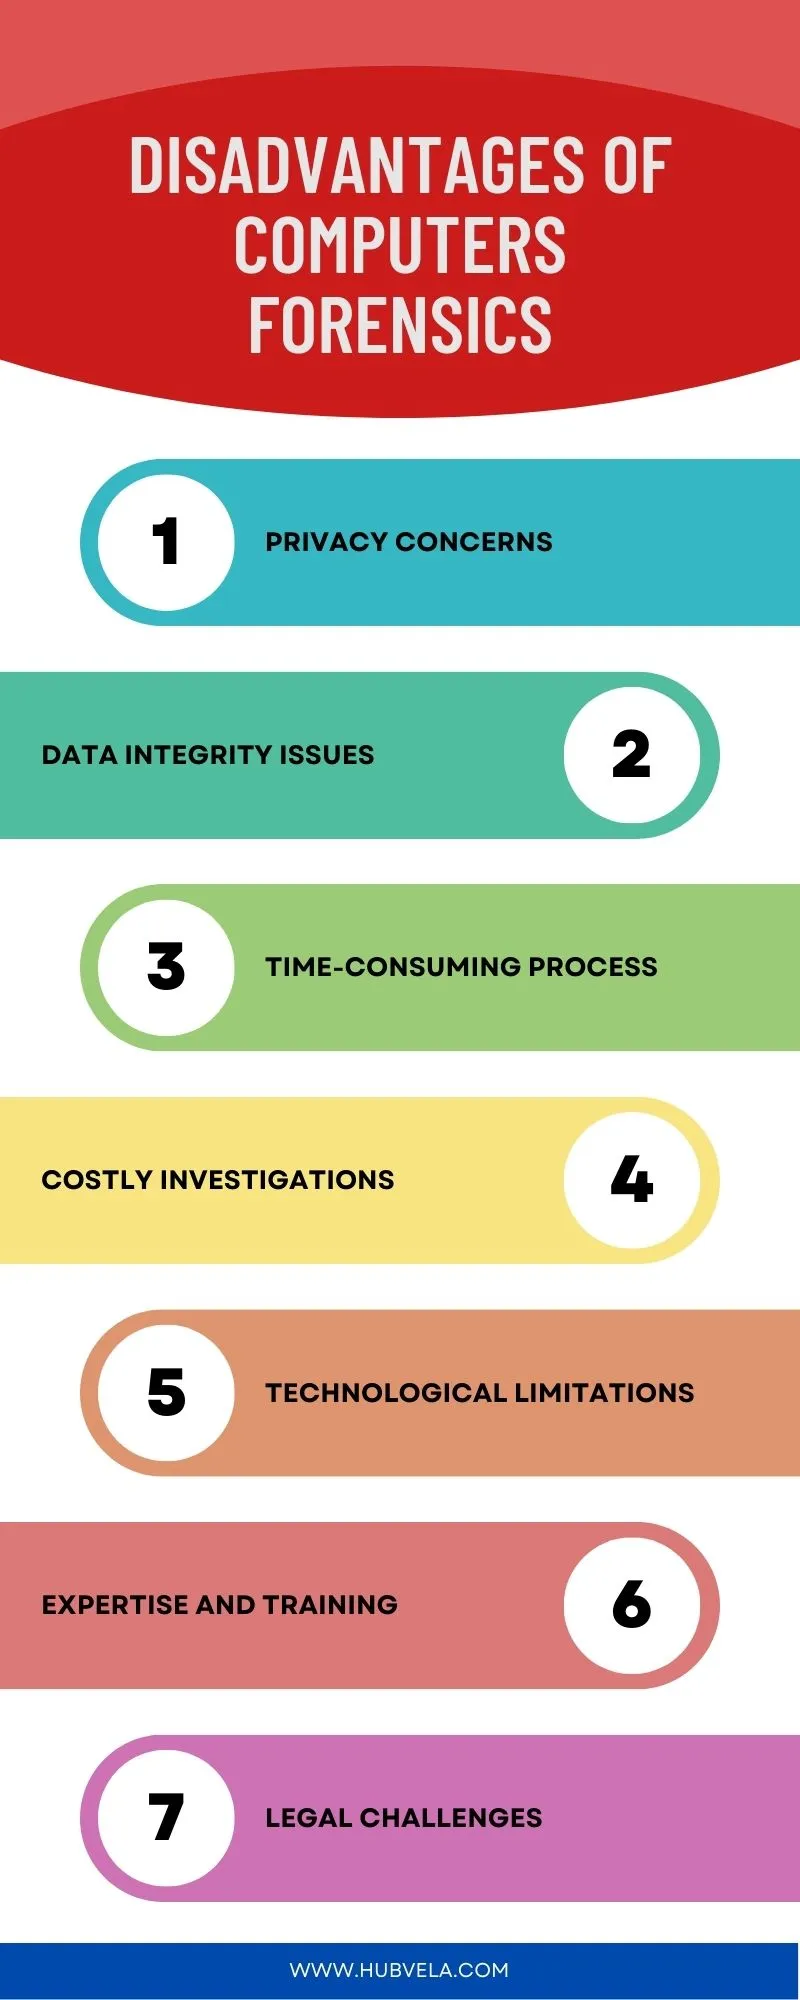 Disadvantages of Computers Forensics Infographic